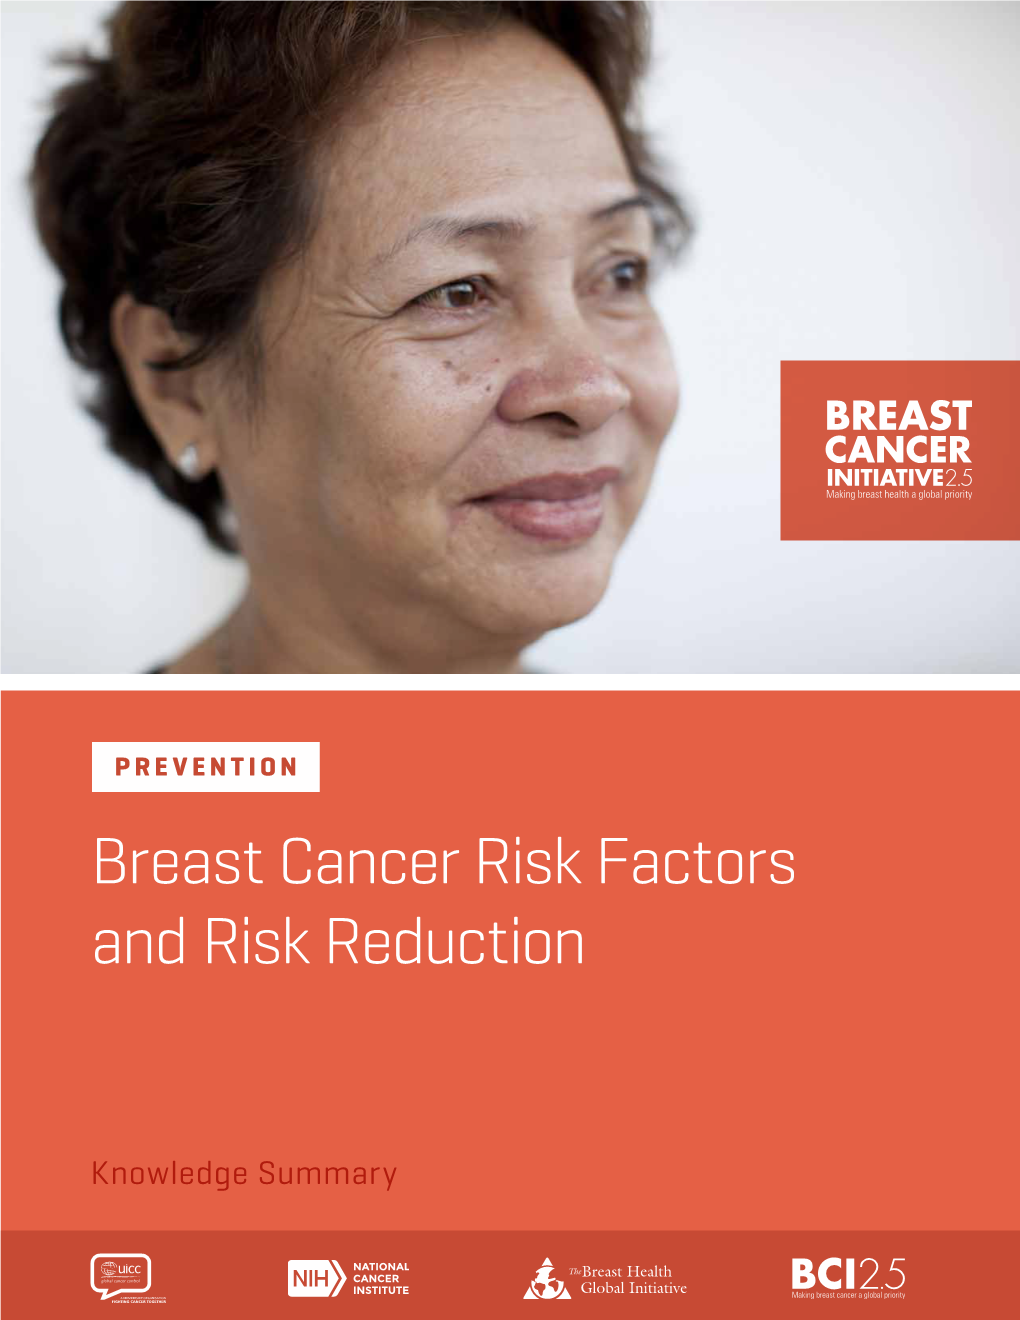 Prevention: Breast Cancer Risk Factors and Risk Reduction